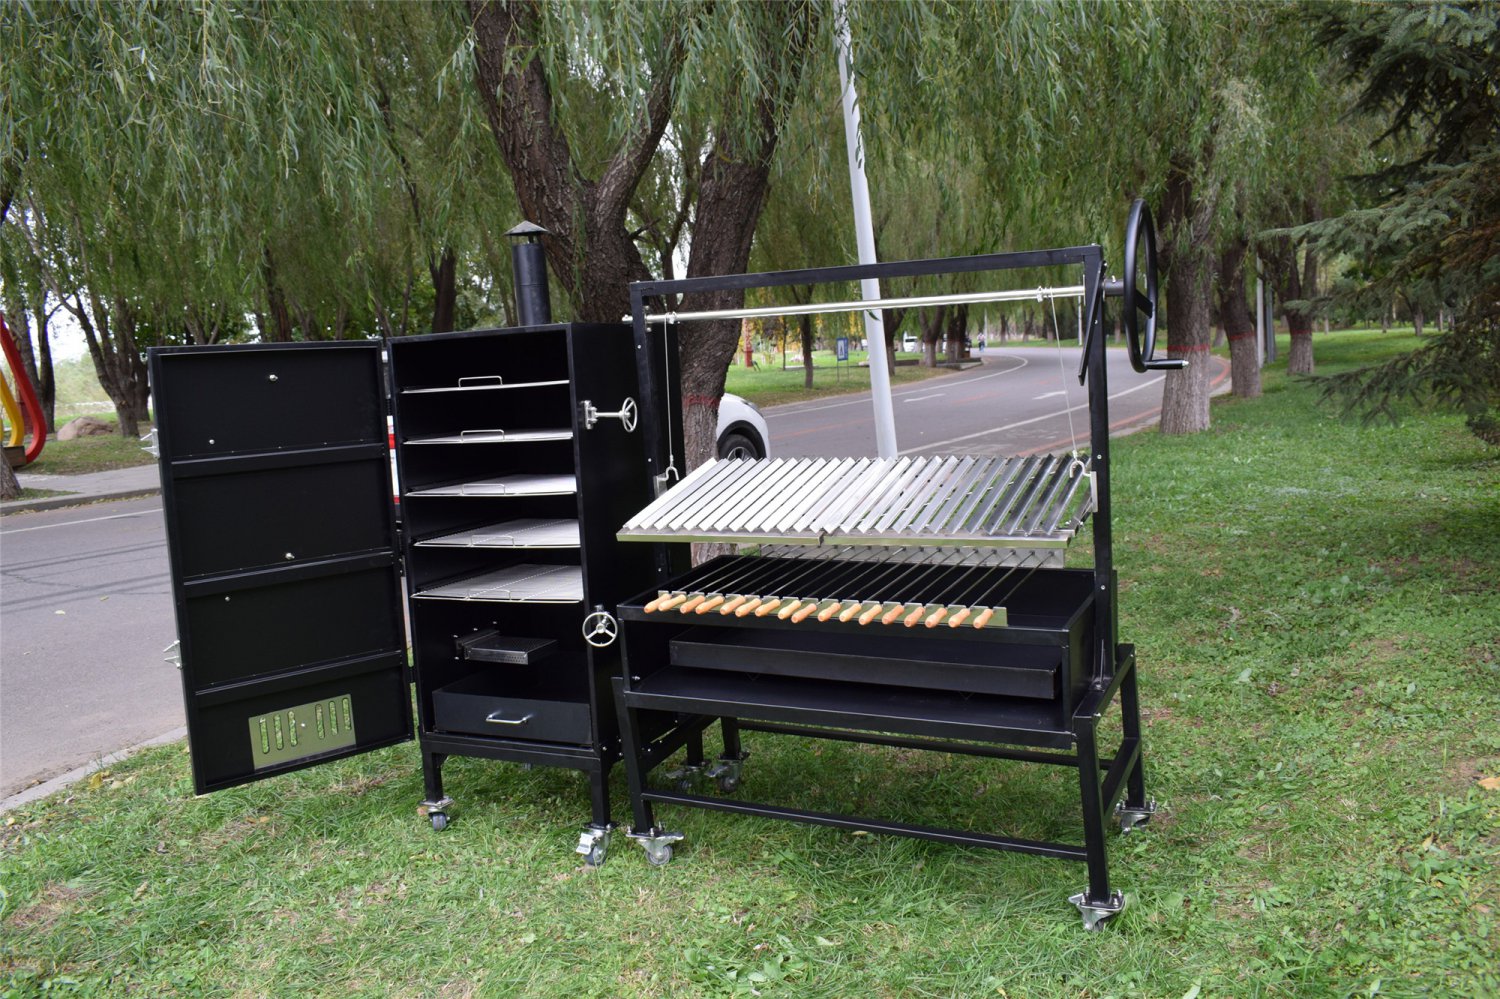 Large Santa Maria / Argentine Grill Charcoal BBQ Grill with Smoker ...